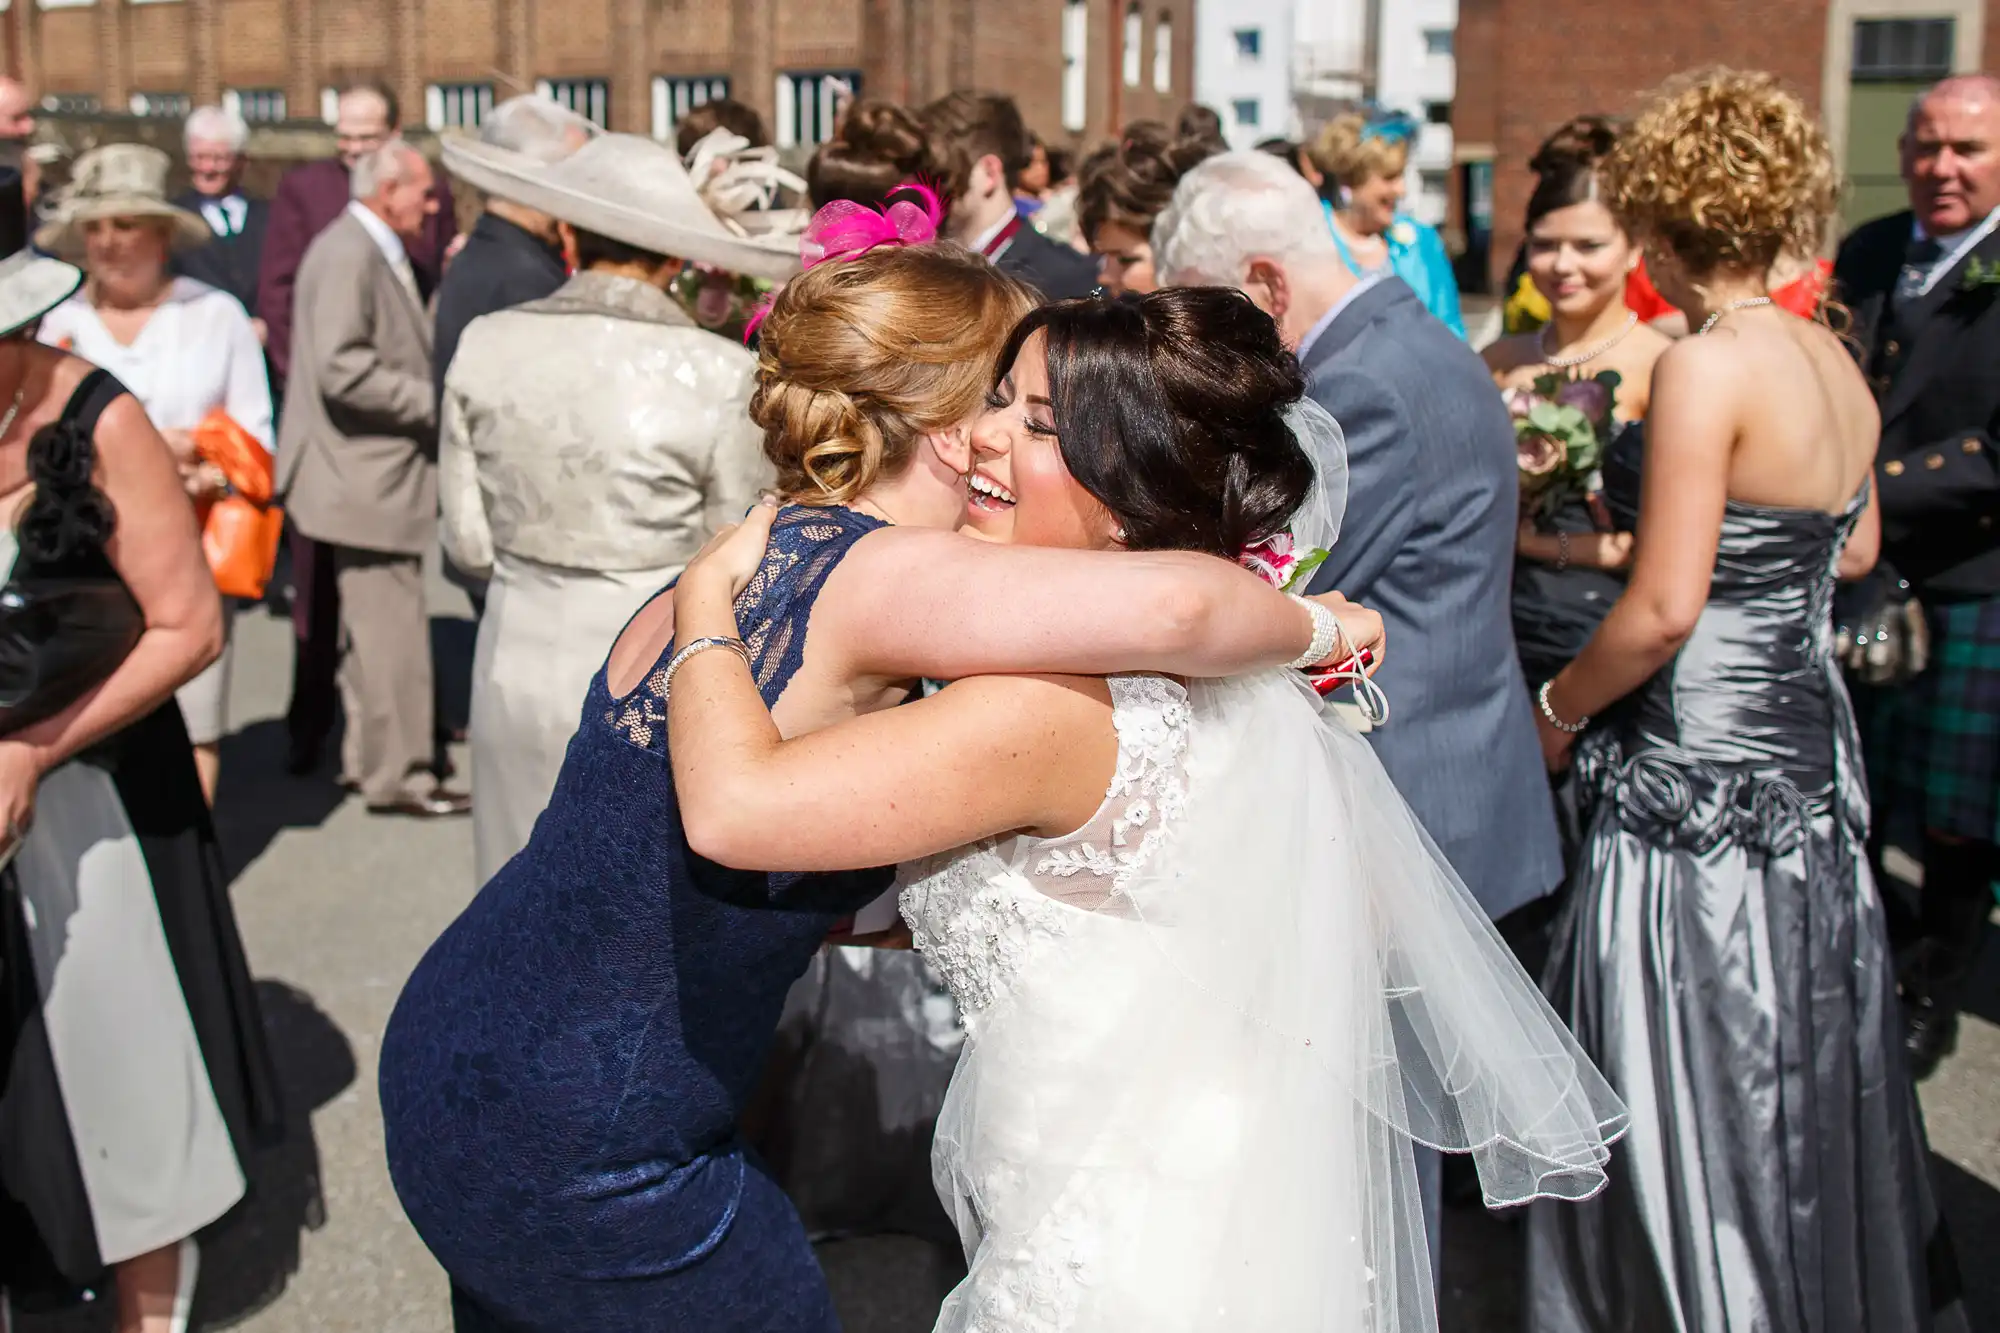 A bride in a white dress hugs a woman in a blue dress at a sunny outdoor wedding reception, surrounded by guests in formal attire.